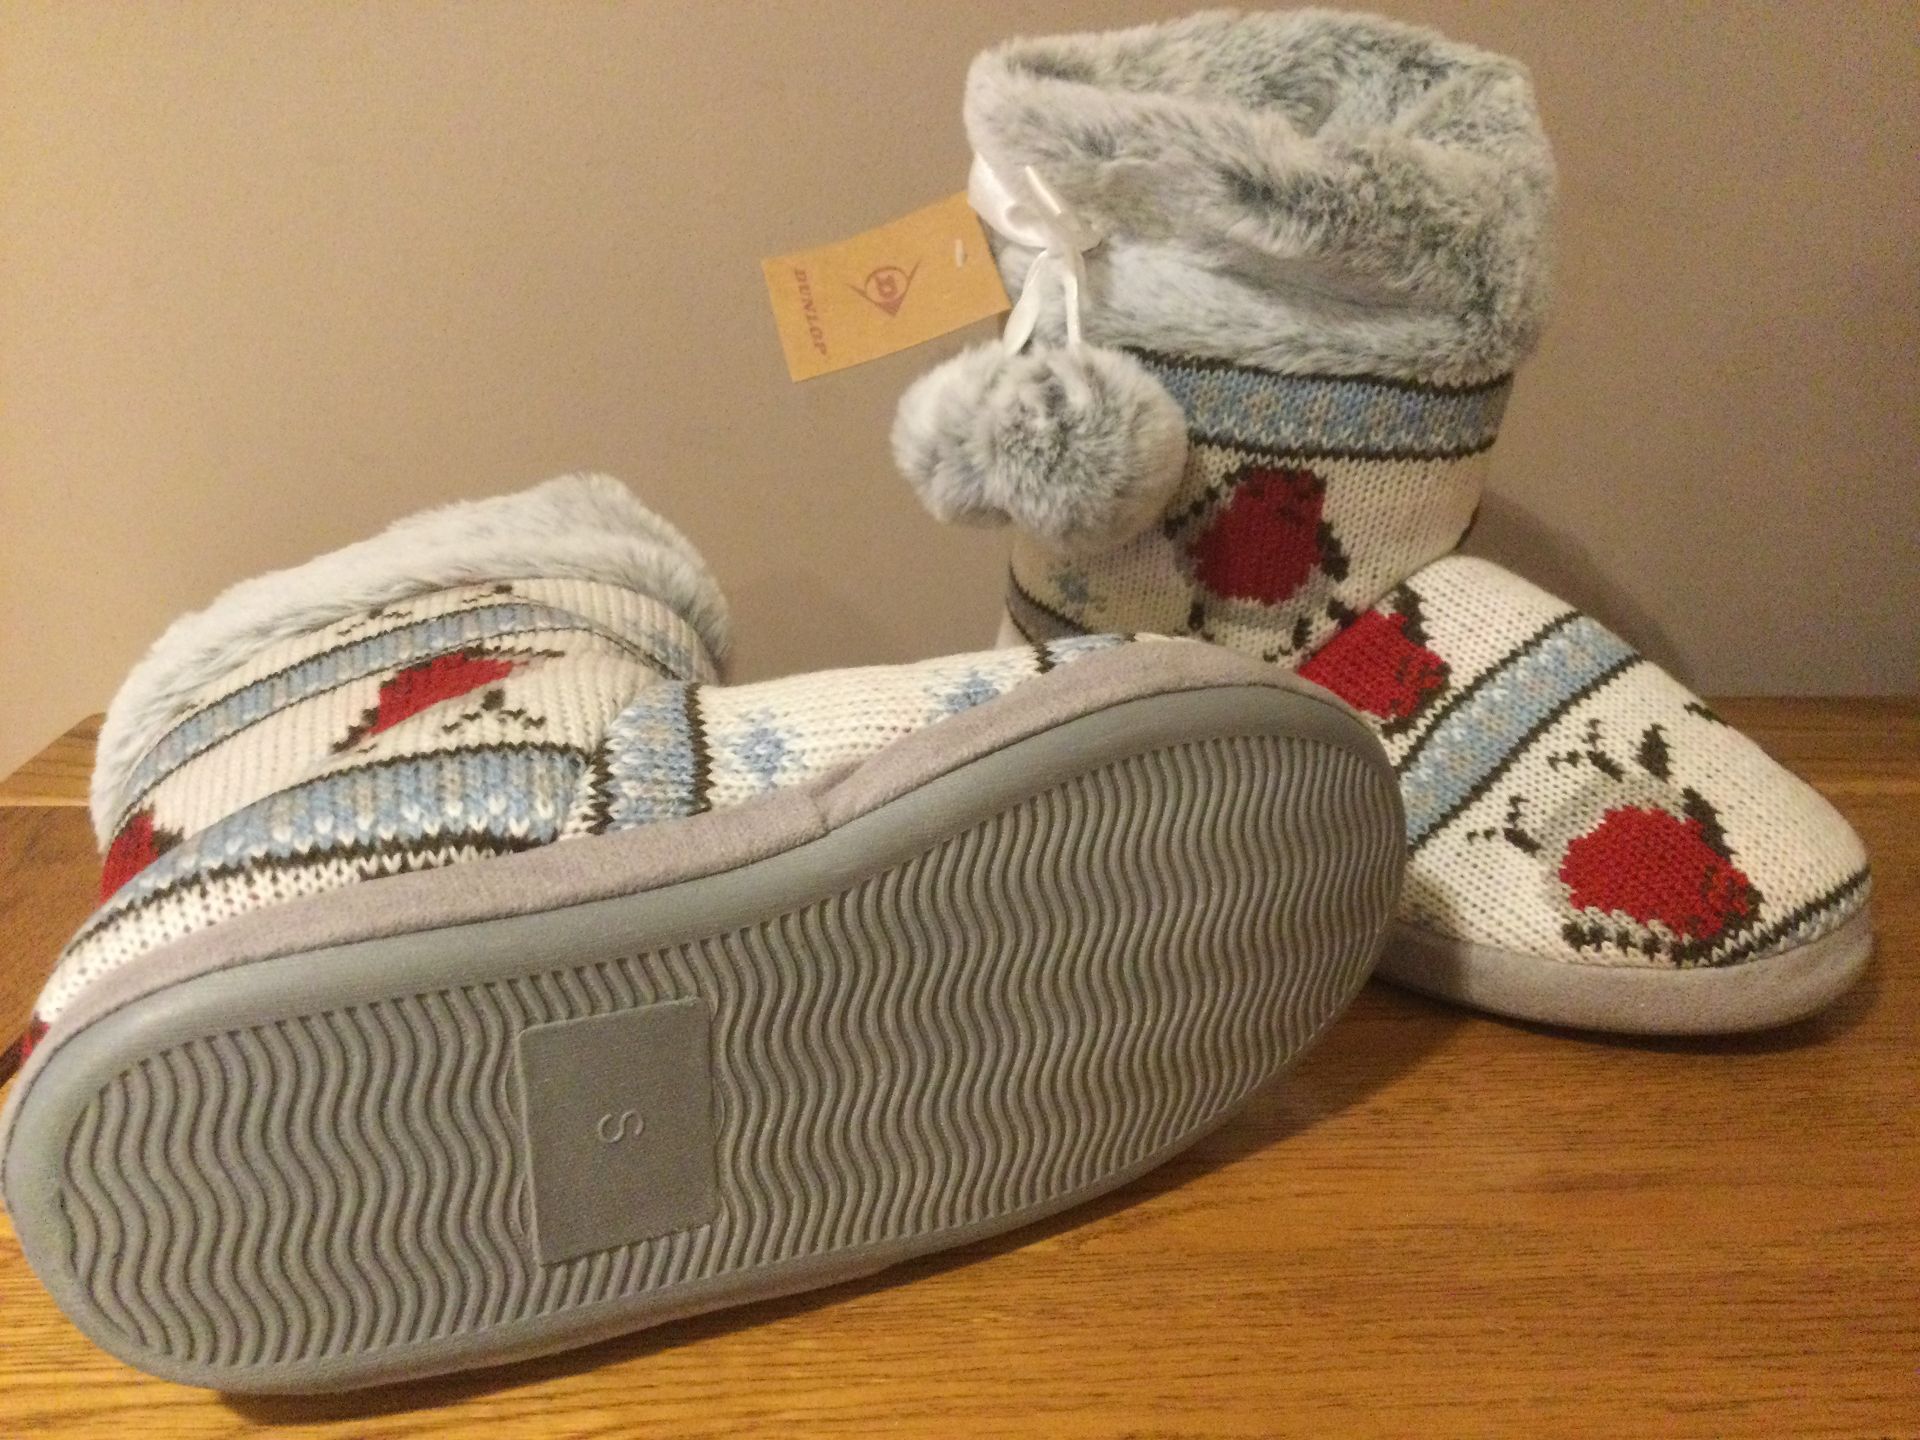 Dunlop “Robin” Cosy Fur Lined Slipper Boots With Pom Pom, Size S (3/4) - New - Image 3 of 5